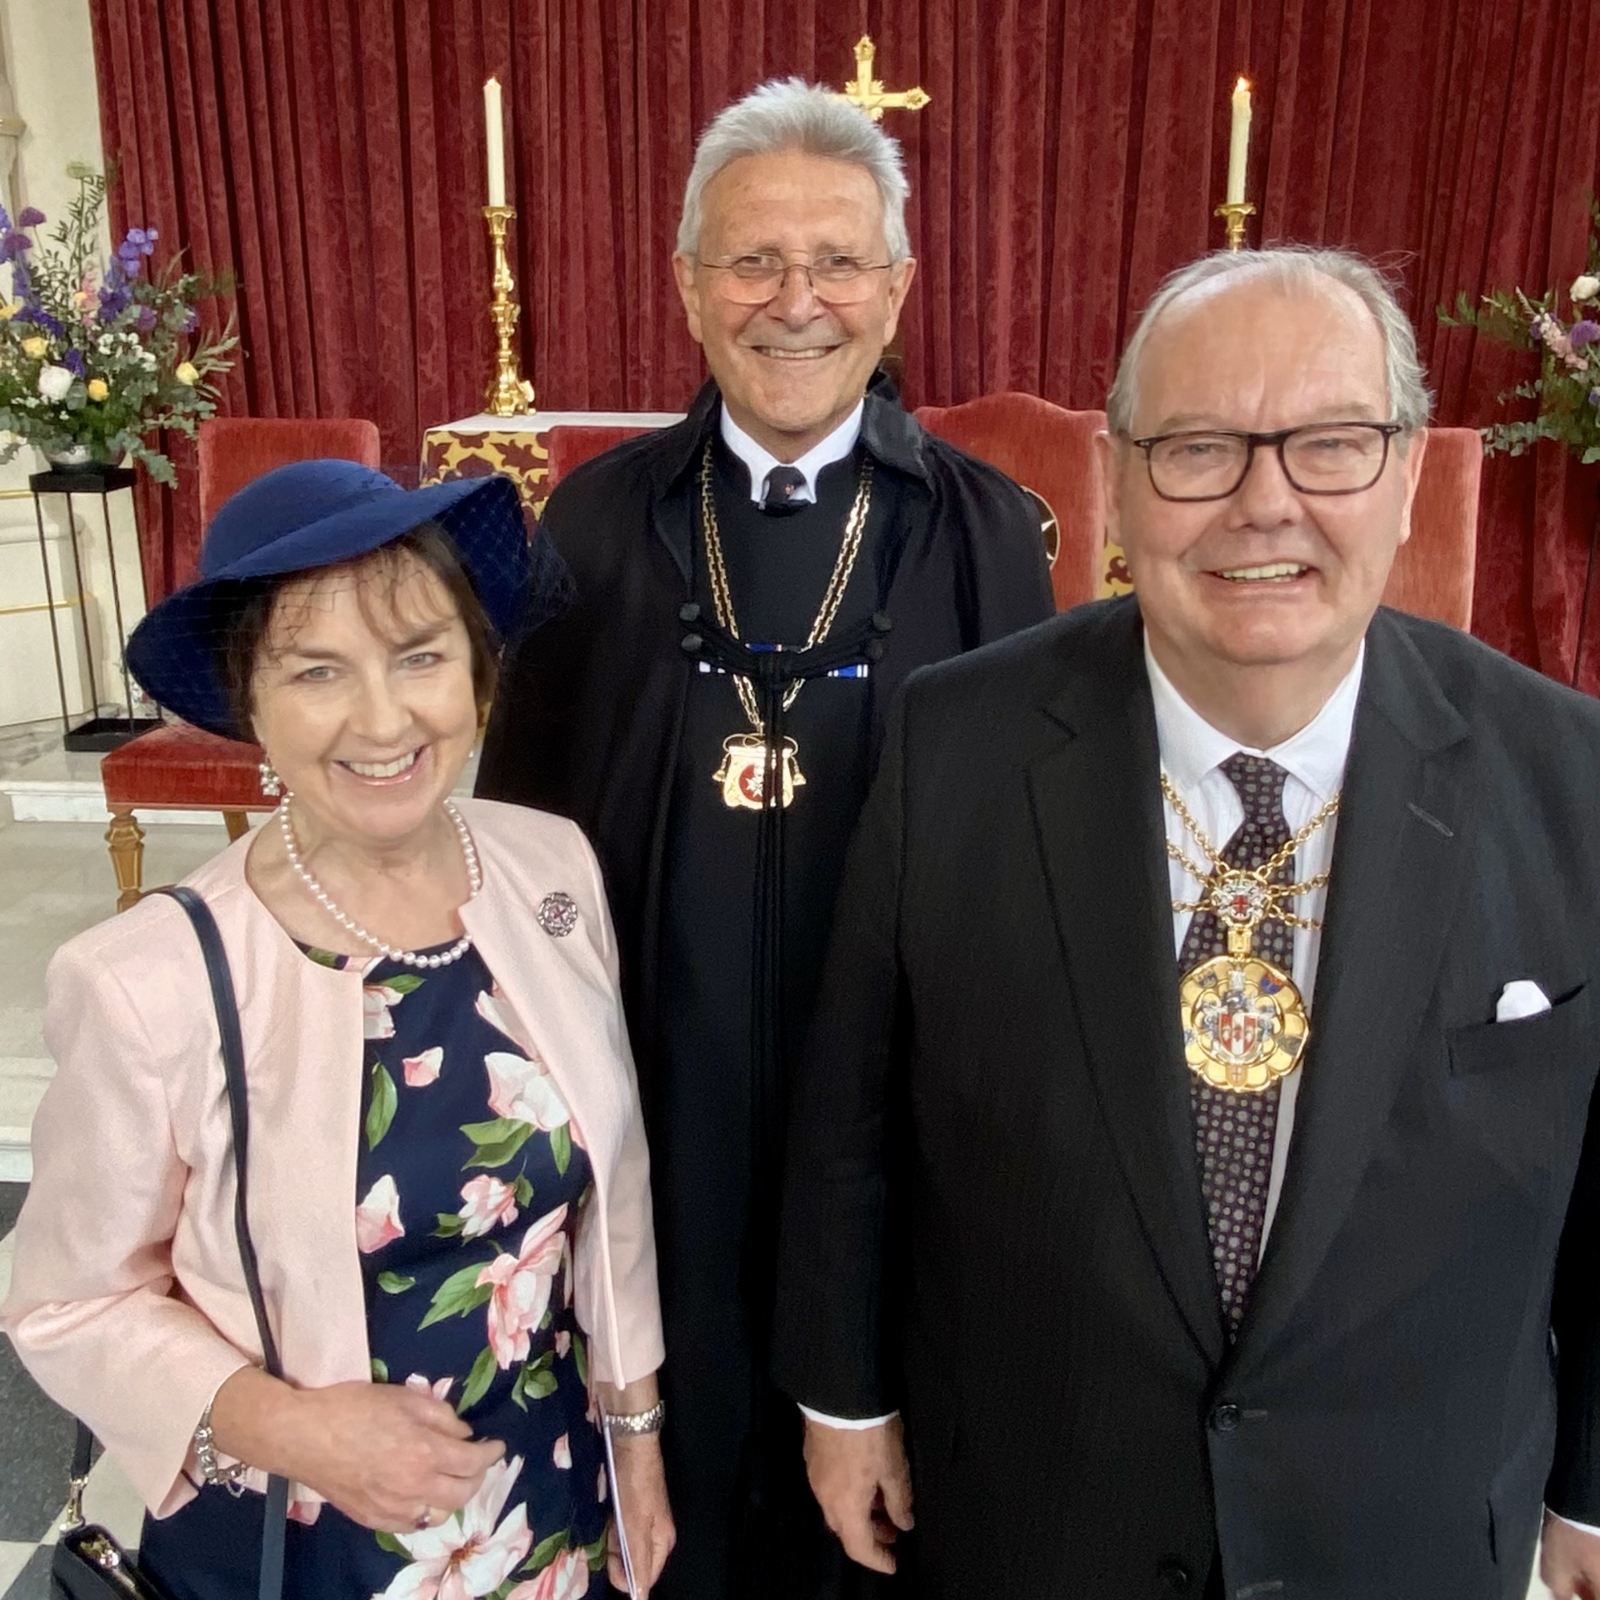 18 May 2023 - Deeply honoured to be admitted as a Member of The Order of St John at an Installation held at The Priory Church in The City, and afterwards at St John’s Gate.